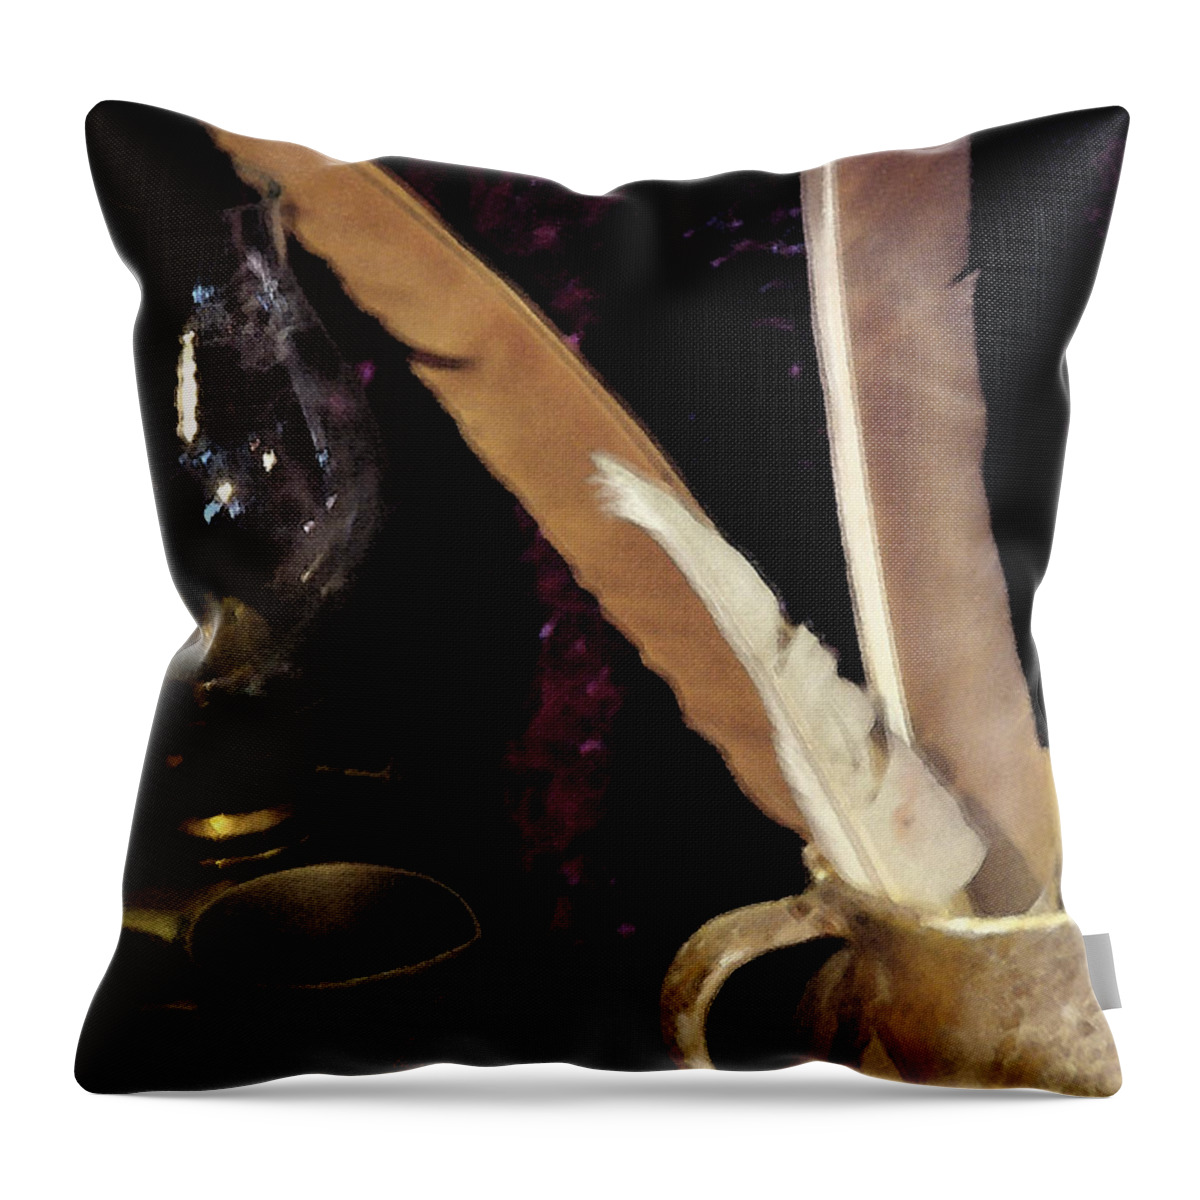 Quill Throw Pillow featuring the photograph Pen Your Thoughts by Linda Shafer